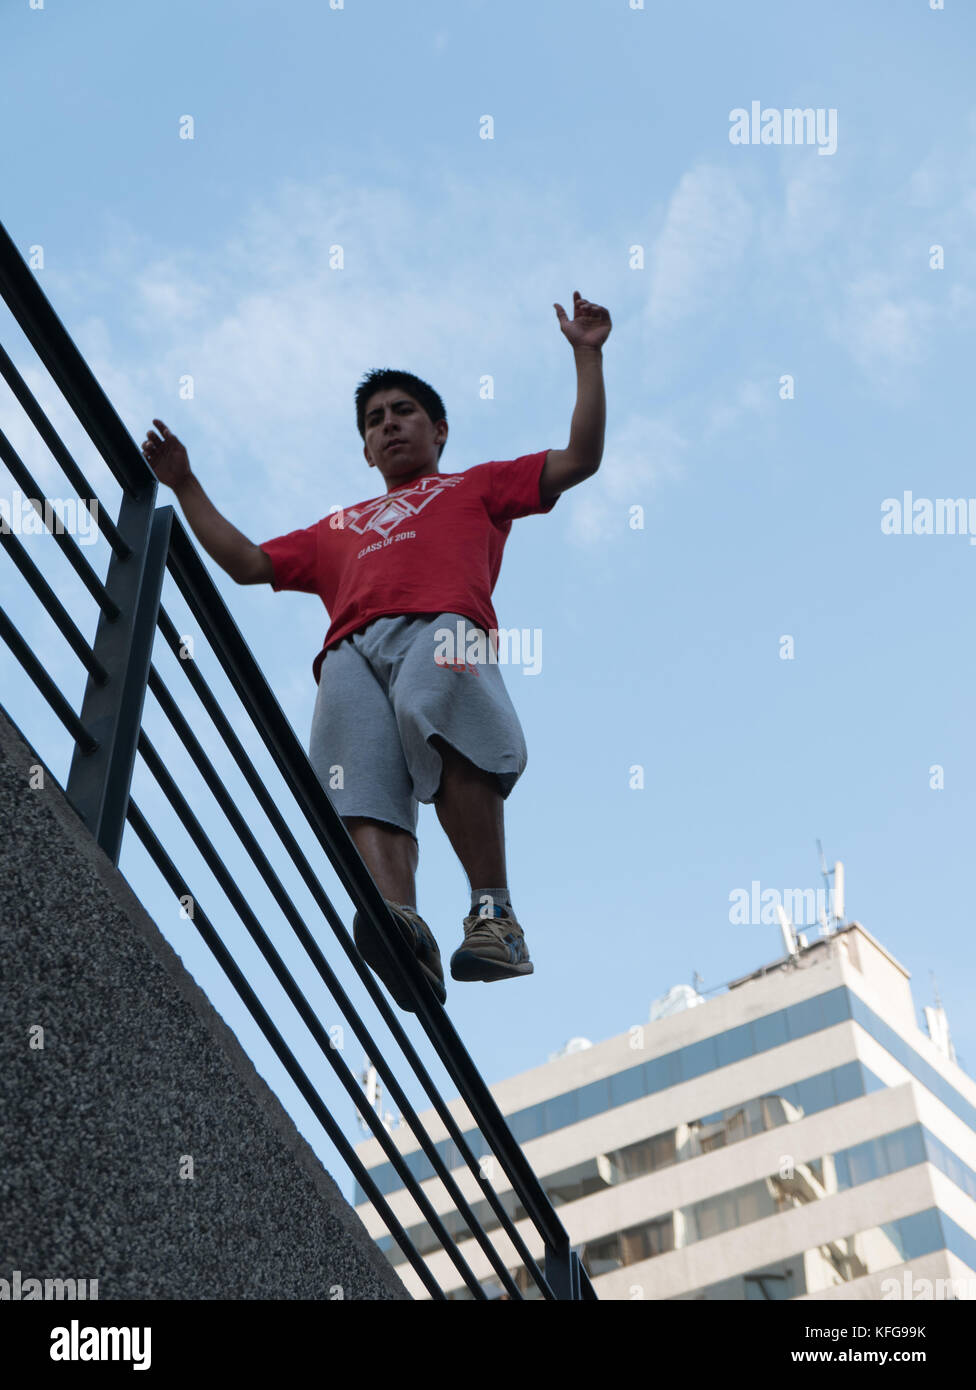 Young man in Santiago Chile engaged in parkour by balancing on a handrail high above the ground with blue sky and tall white building in background Stock Photo